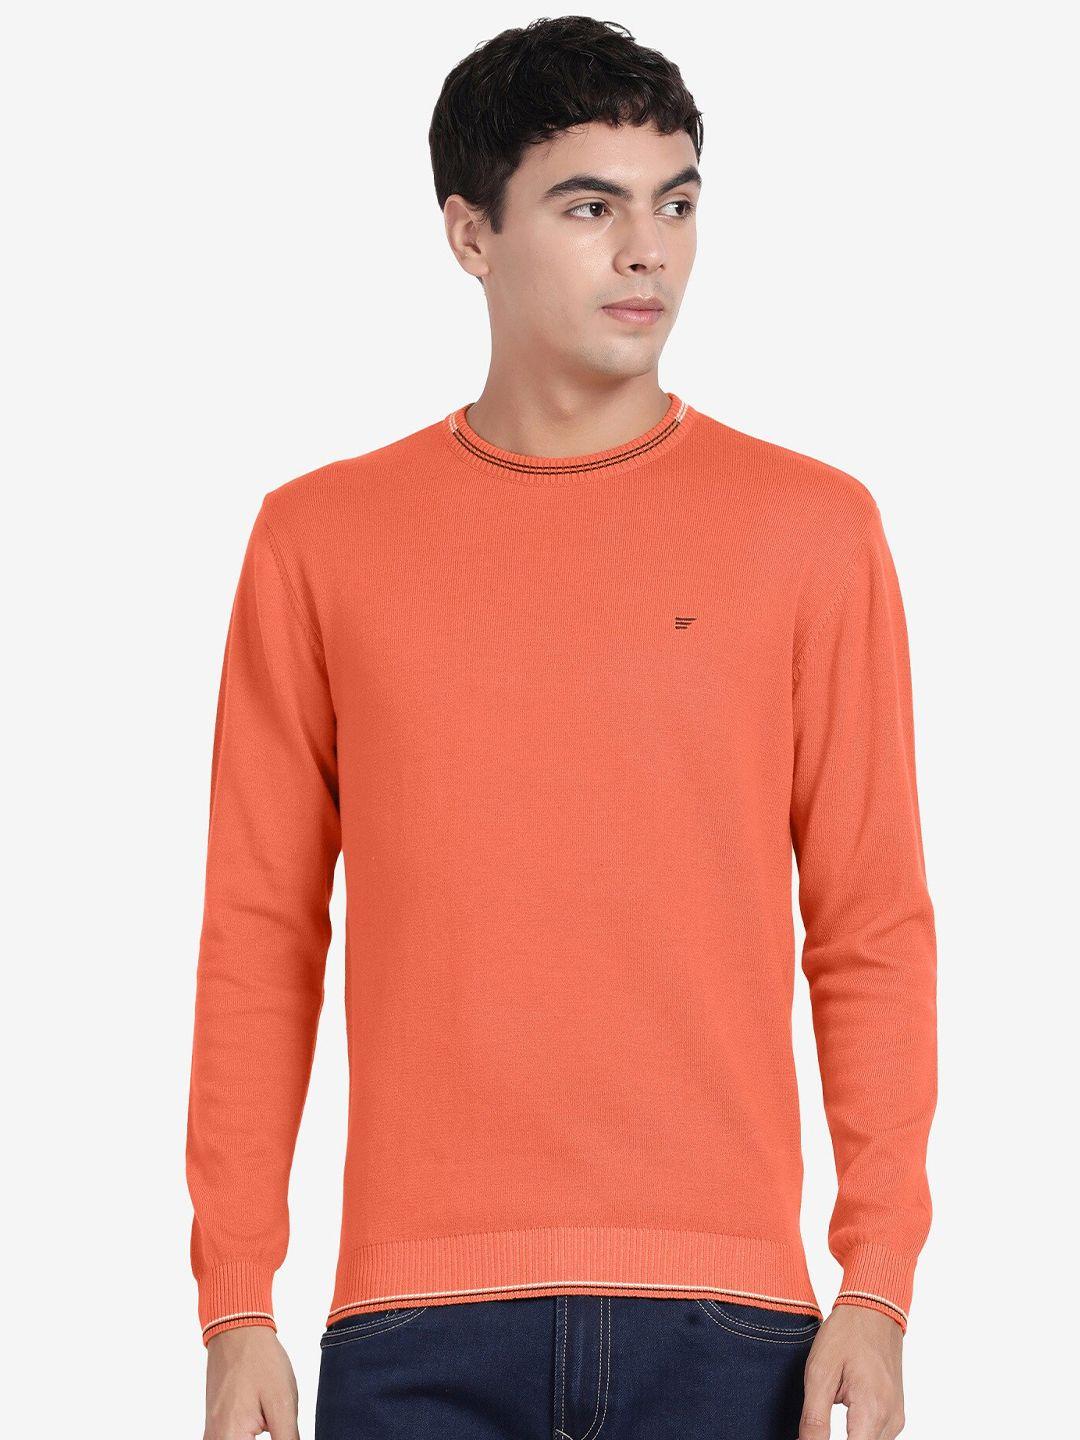 t-base-round-neck-long-sleeves-cotton-pullover